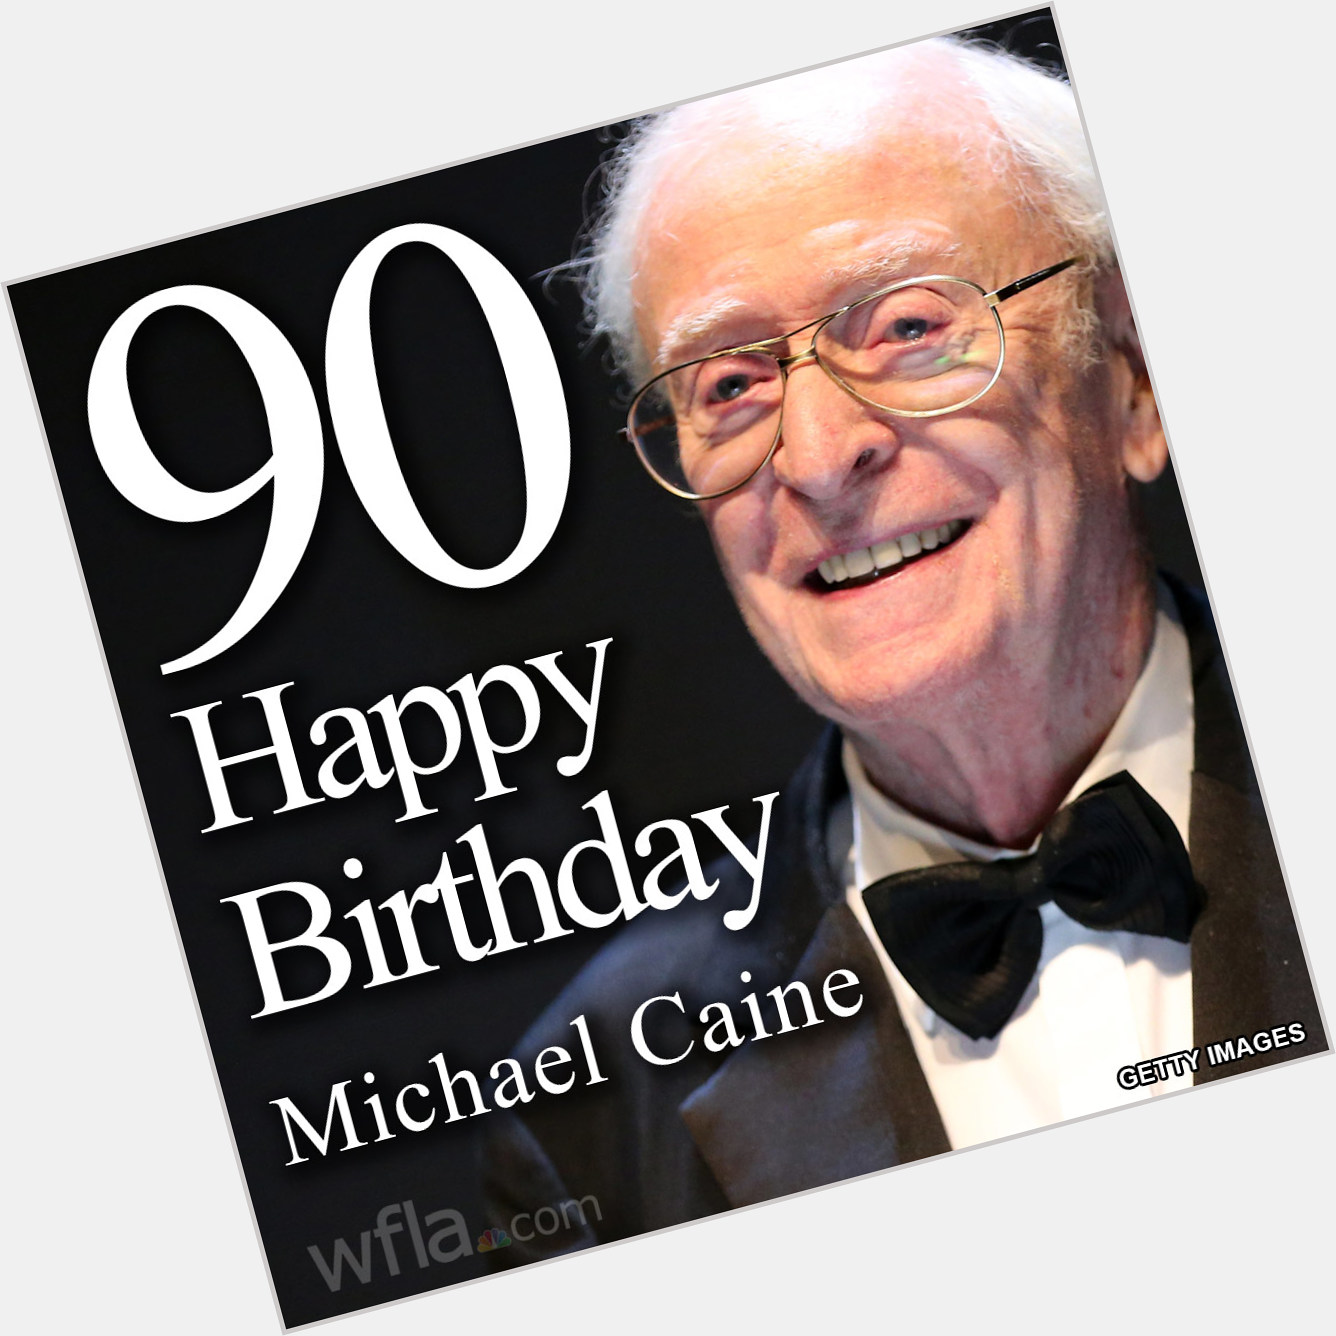 HAPPY BIRTHDAY, MICHAEL CAINE! The British film icon is turning 90 today!  